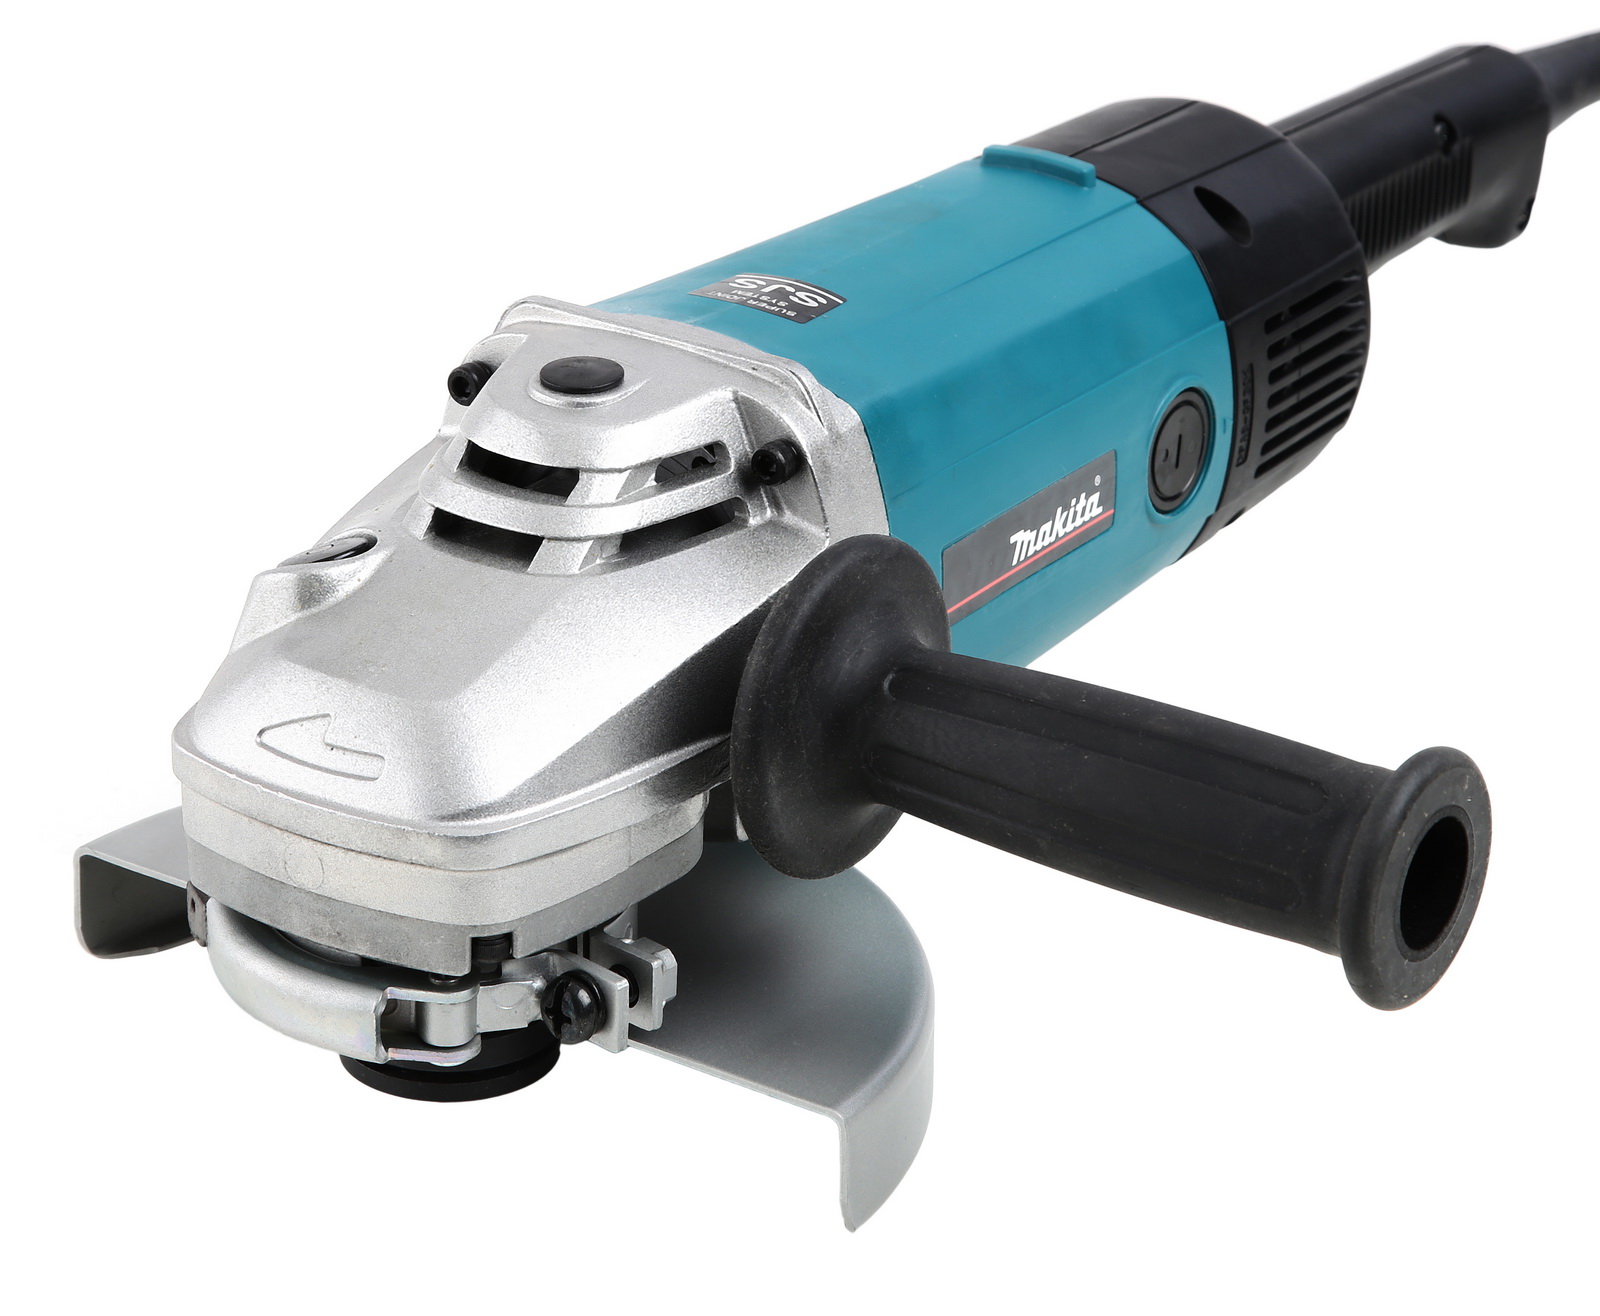  () Makita - Makita - Makita  ()<br>: 2000,<br>: ,<br>: 7600,<br> : 180,<br> : 14,<br>   ( ): ,<br> : 5.3,<br> : ,<br> : <br>